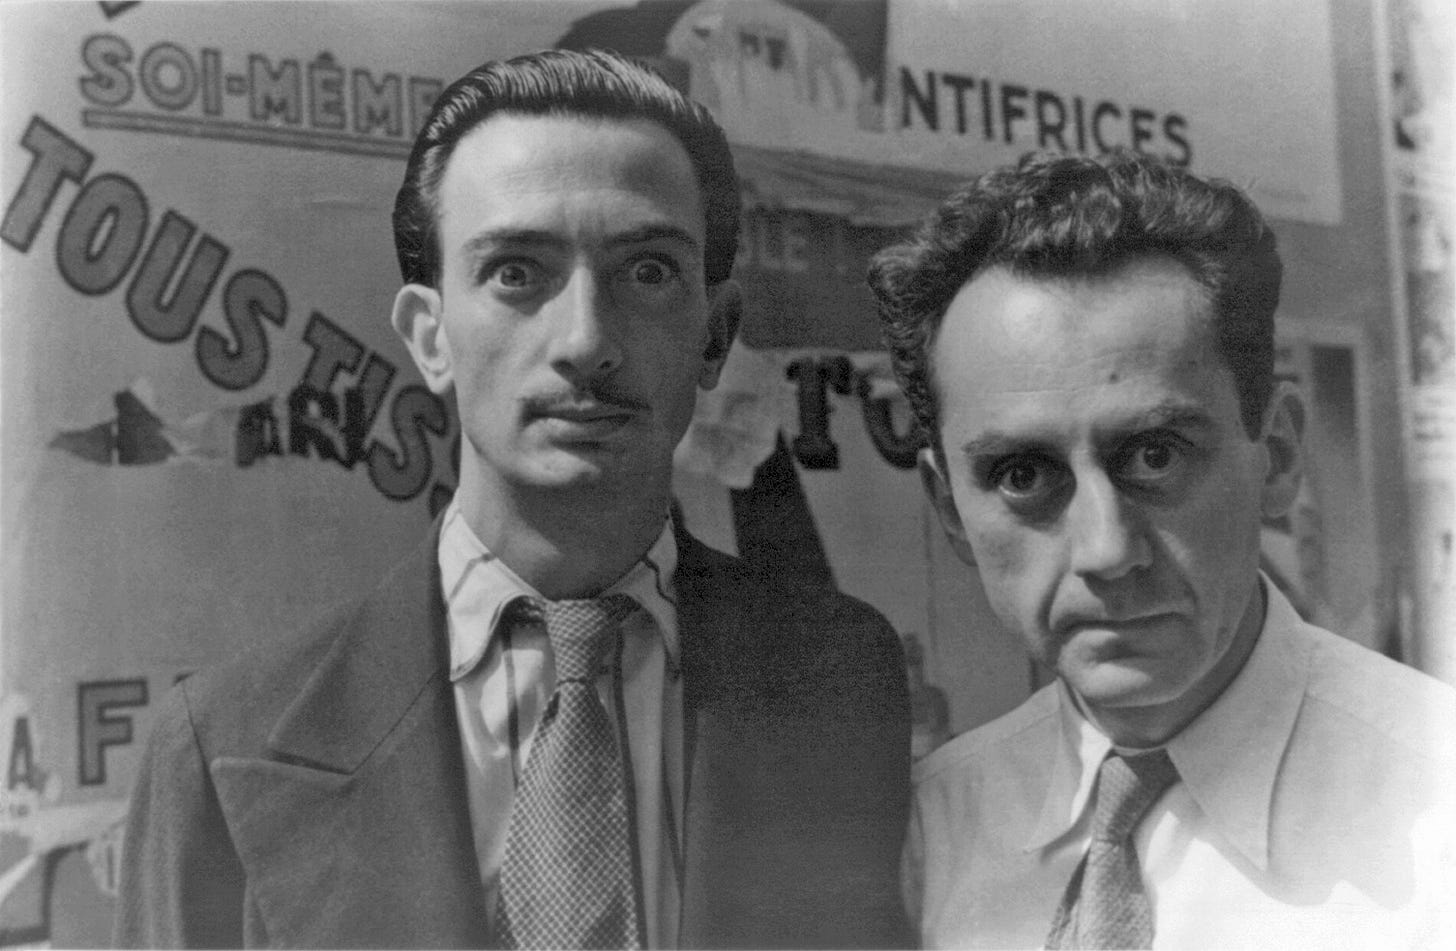 Salvador Dalí and Man Ray in Paris, on June 16, 1934, making "wild eyes" for photographer Carl Van Vechten